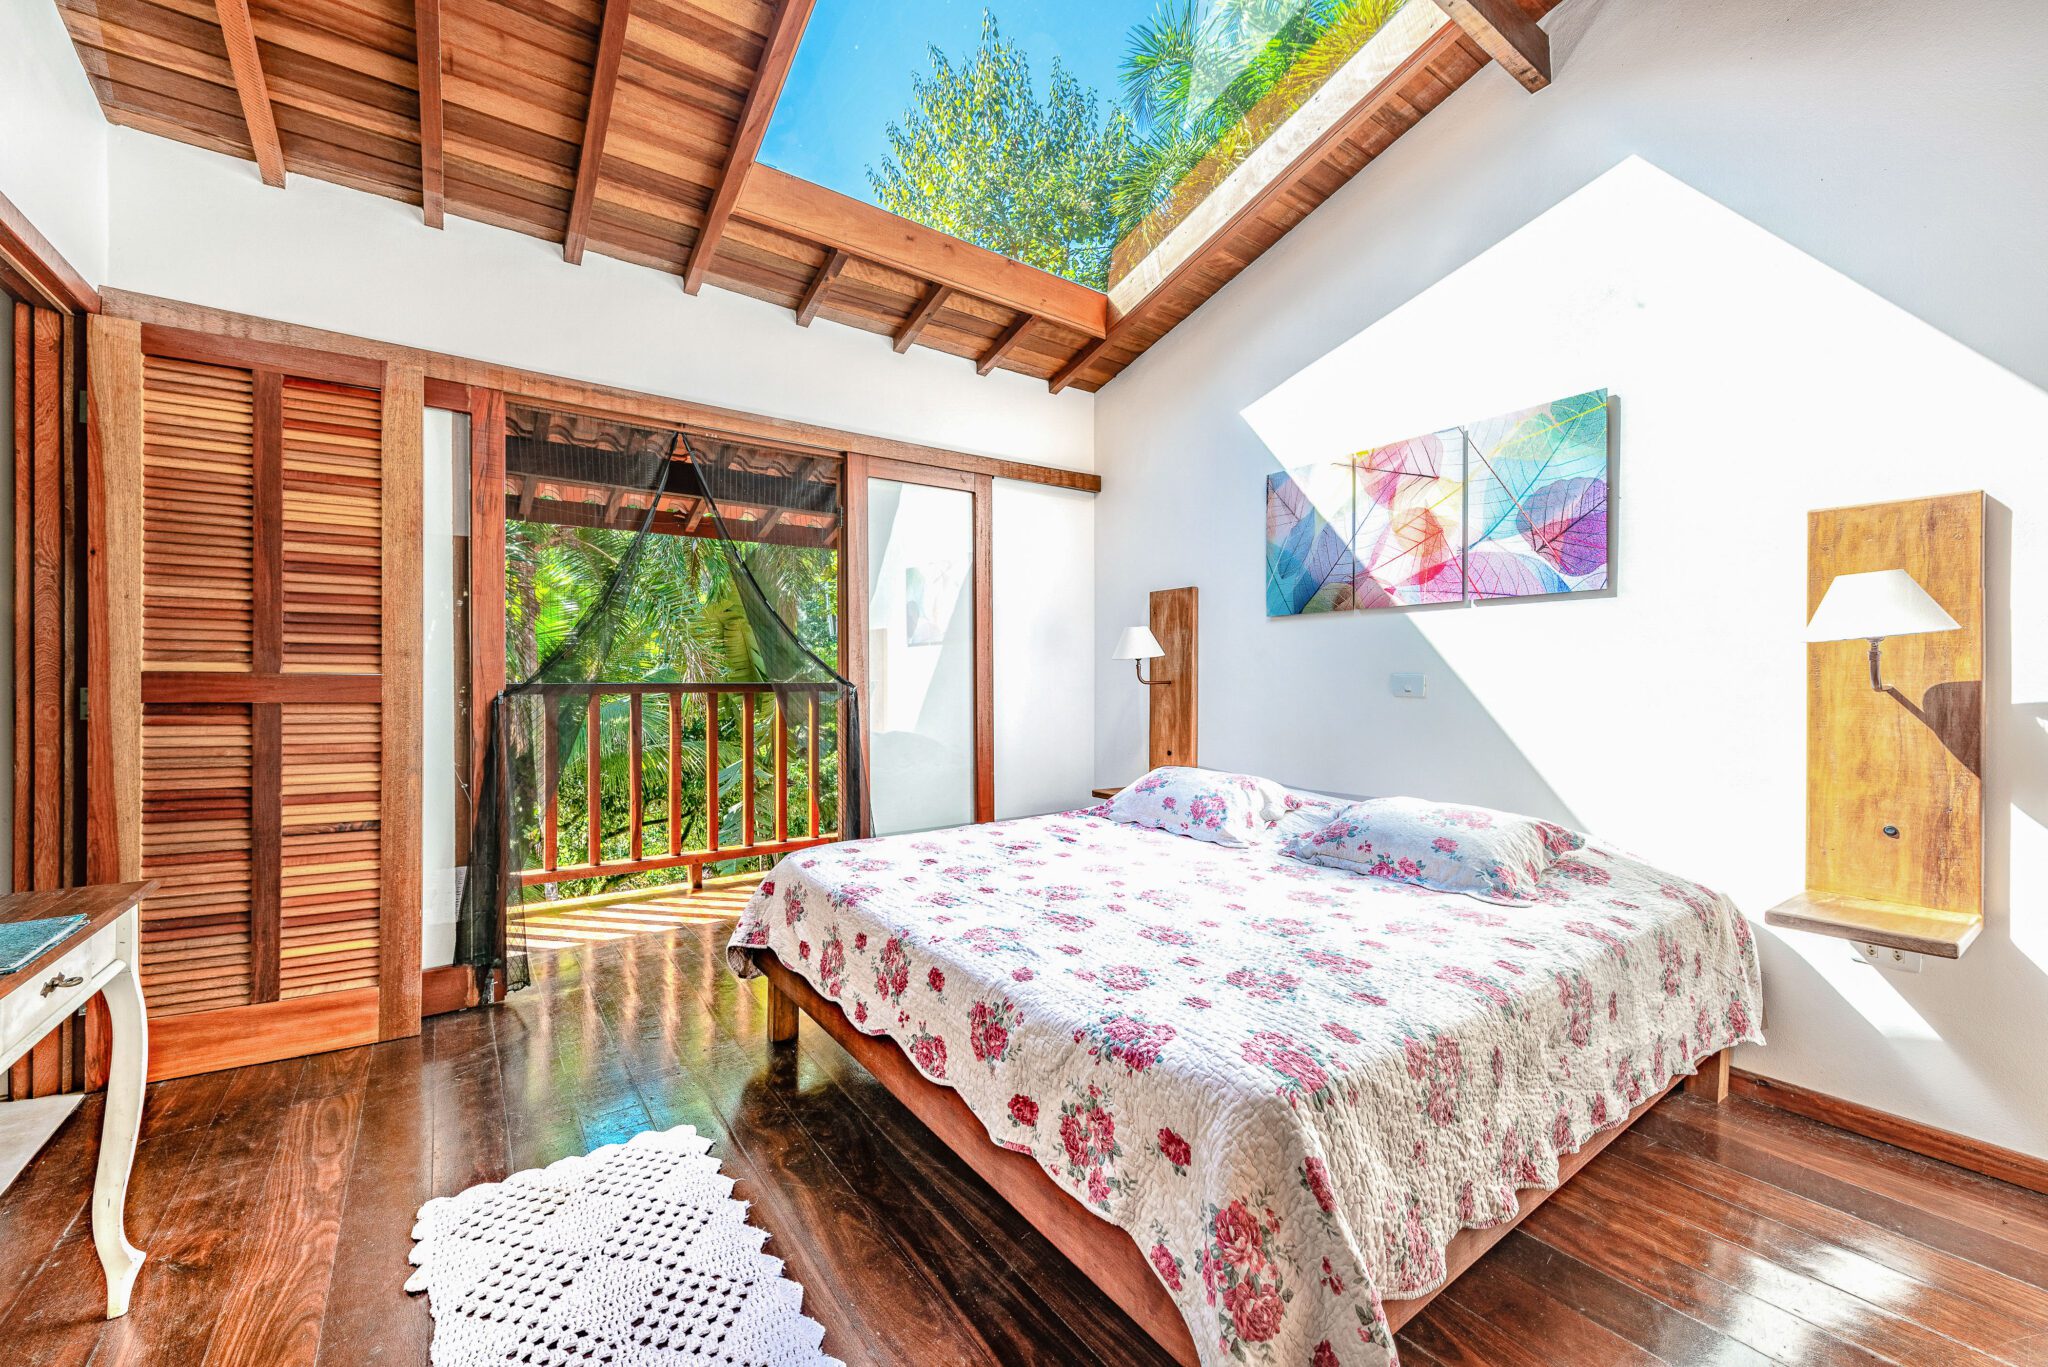 A home listed on Airbnb in Brazil that the company designated a guest favorite. Source: Airbnb